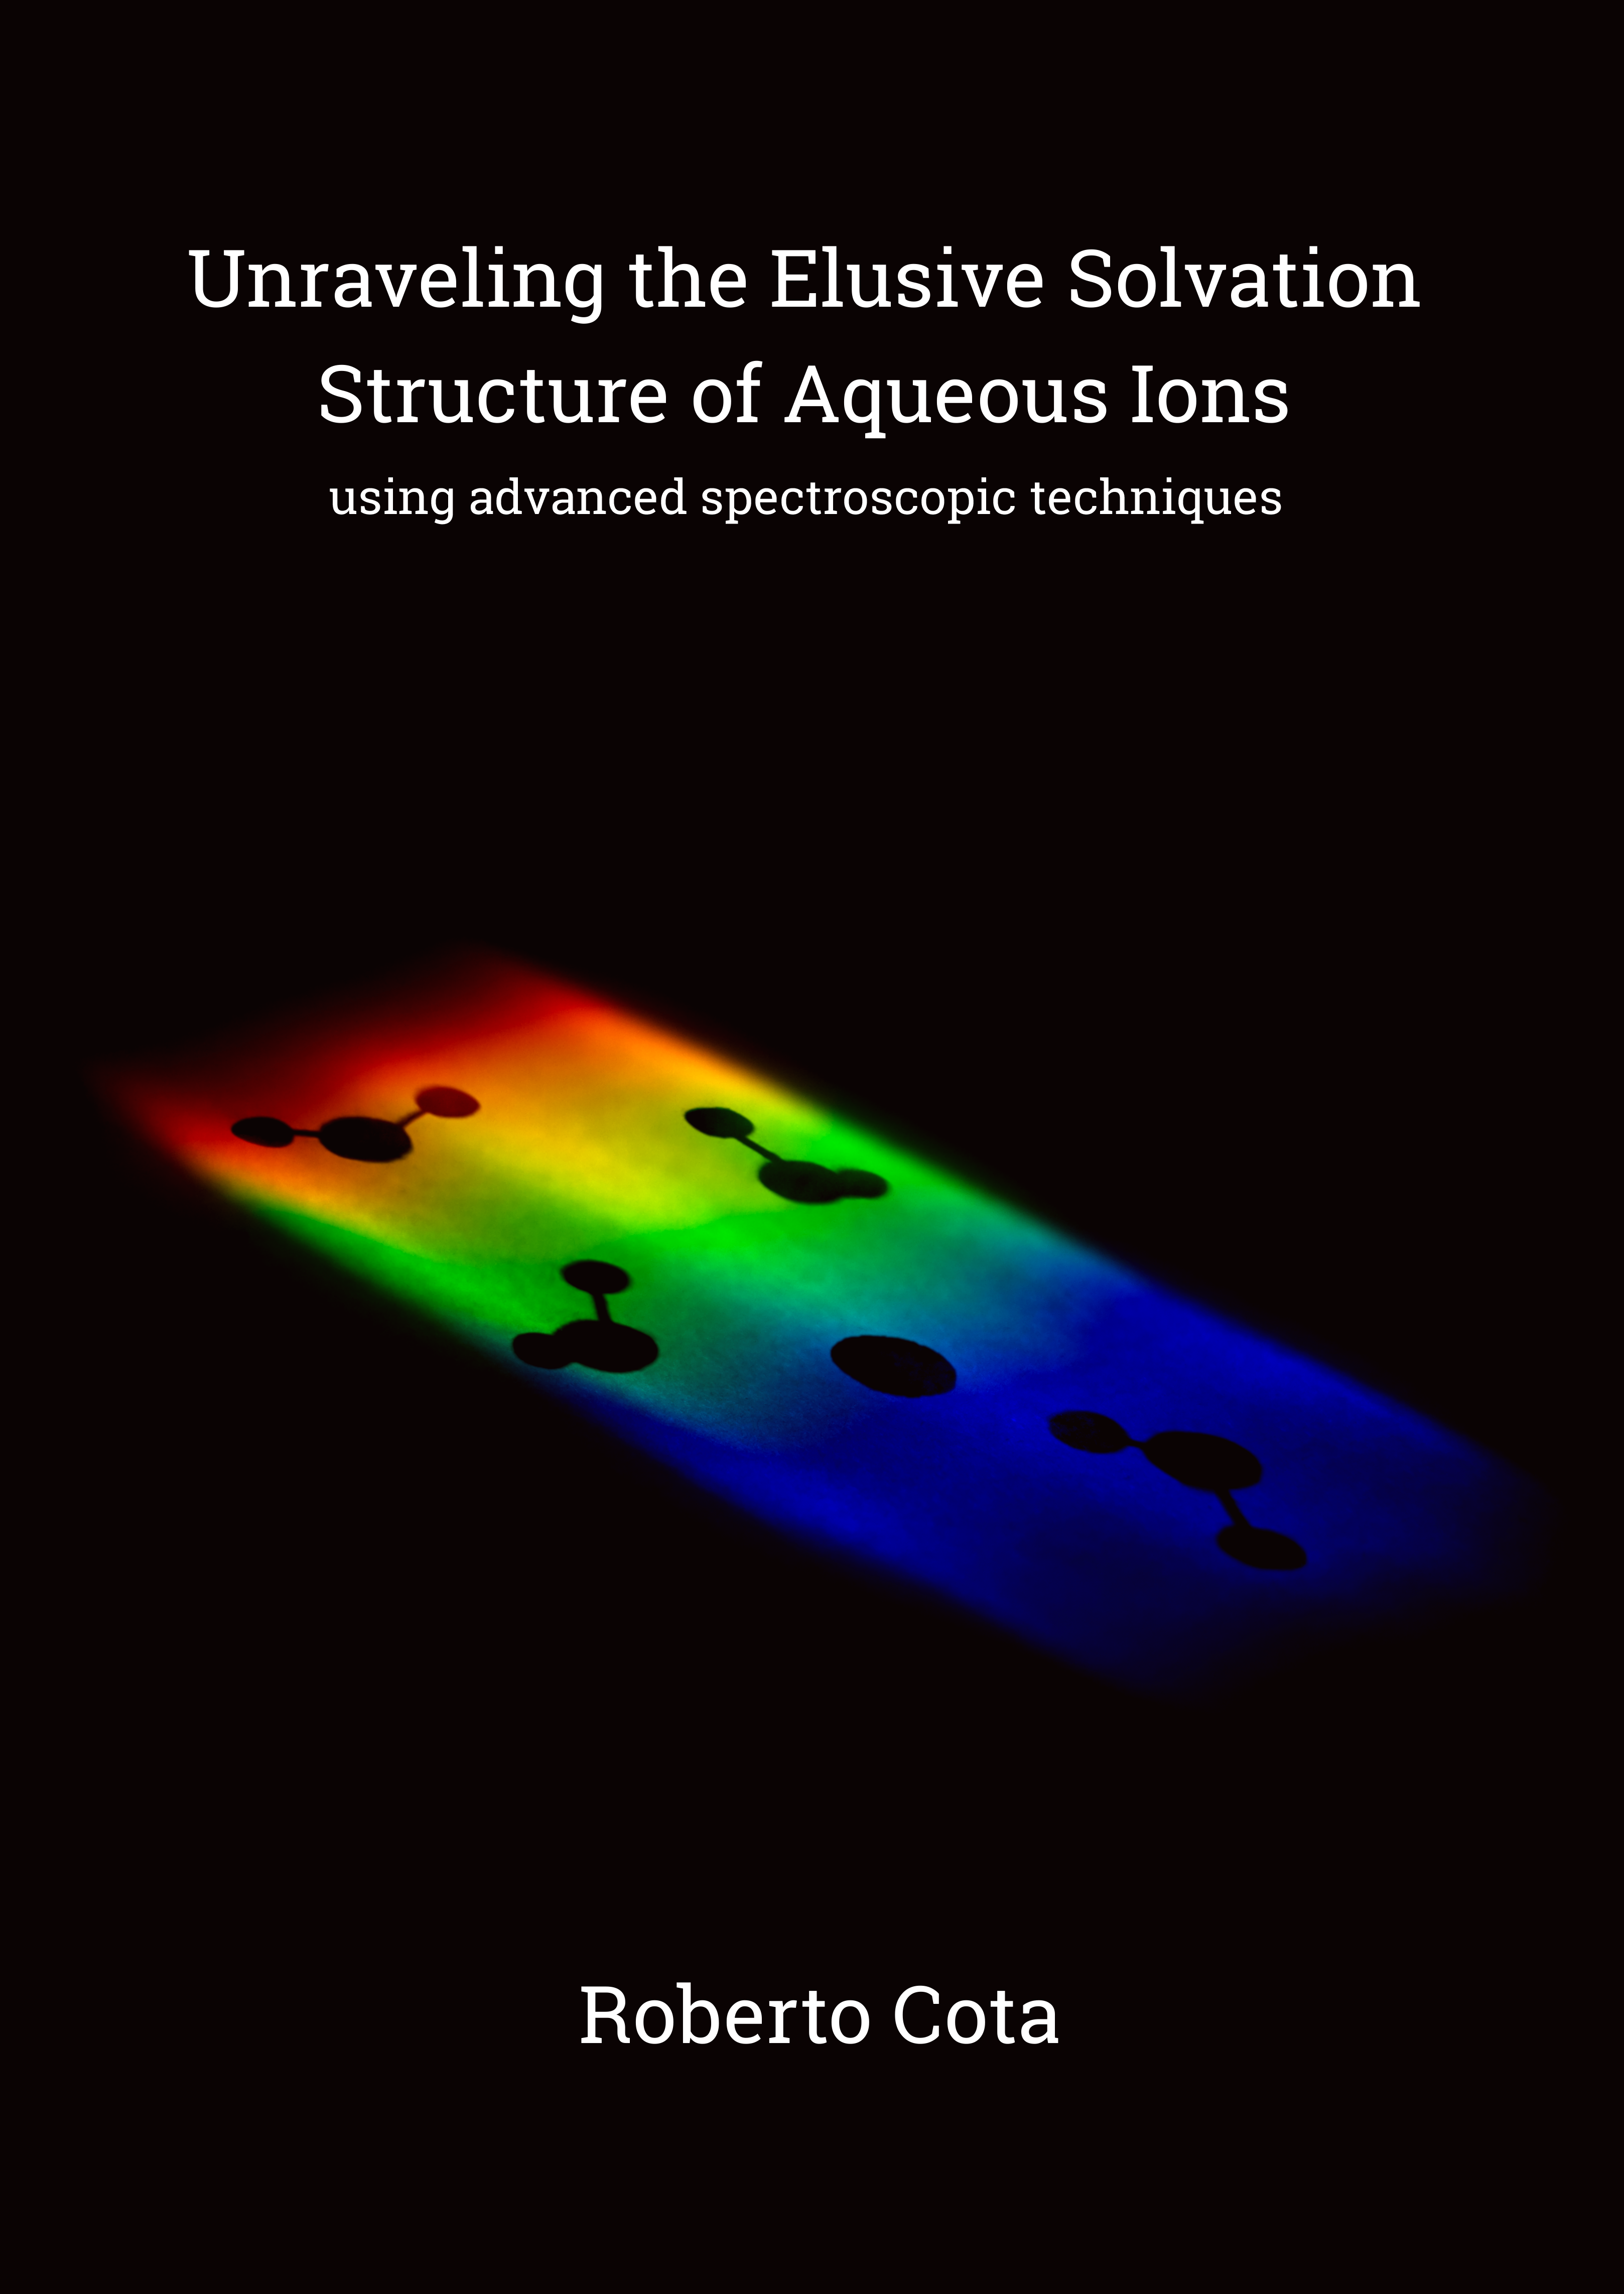 Cover of Unraveling the elusive solvation structure of aqueous ions using advanced spectroscopic techniques